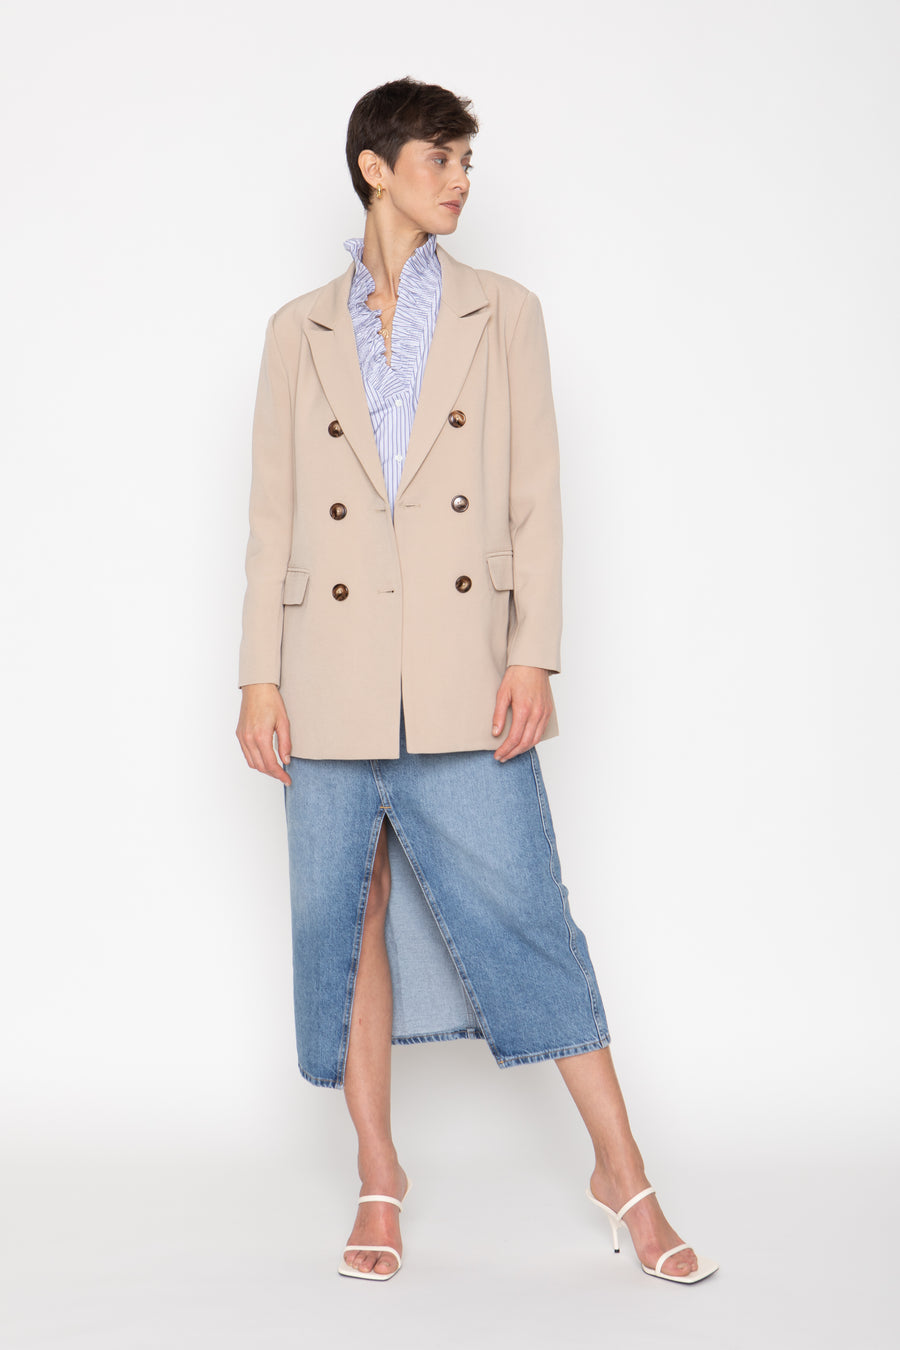 No Srcipt image - Images of 4 of 6 EMORY BLAZER OVERSIZED JACKET DOUBLE BREASTED BEIGE COLOR FLAP POCKETS